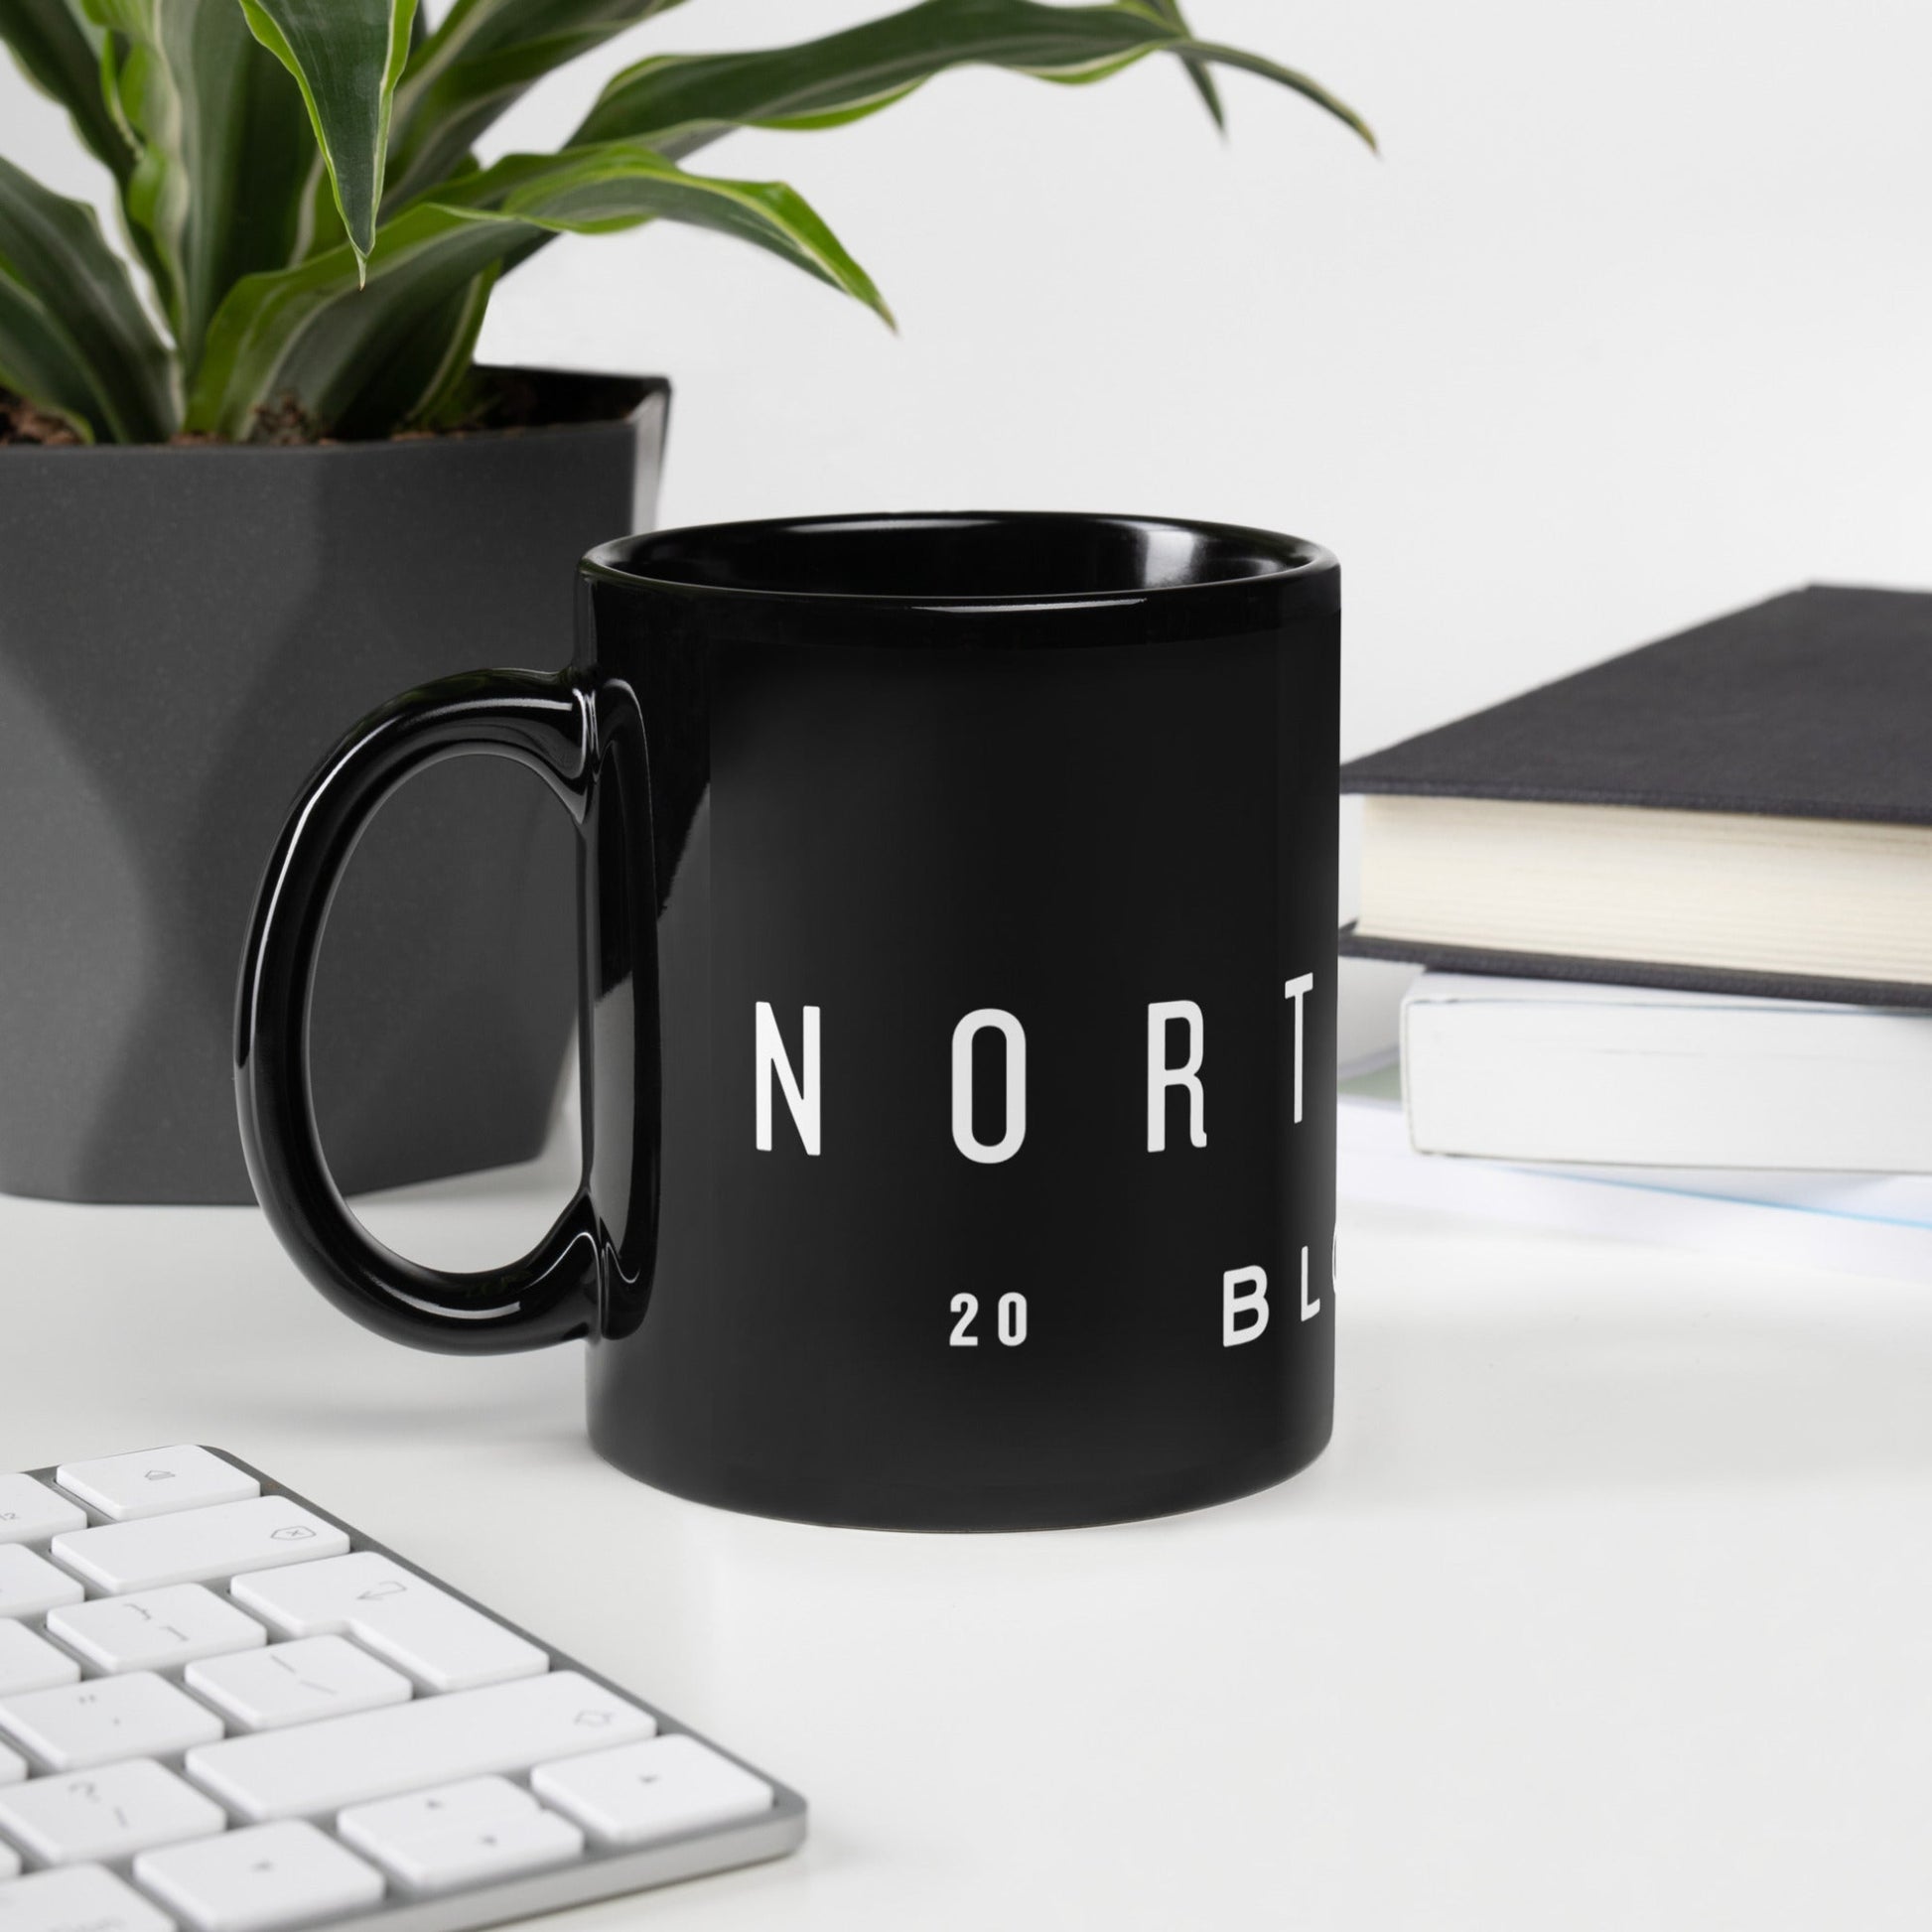 Glossy black mug with "North Wood Blooms" written in glossy white print.